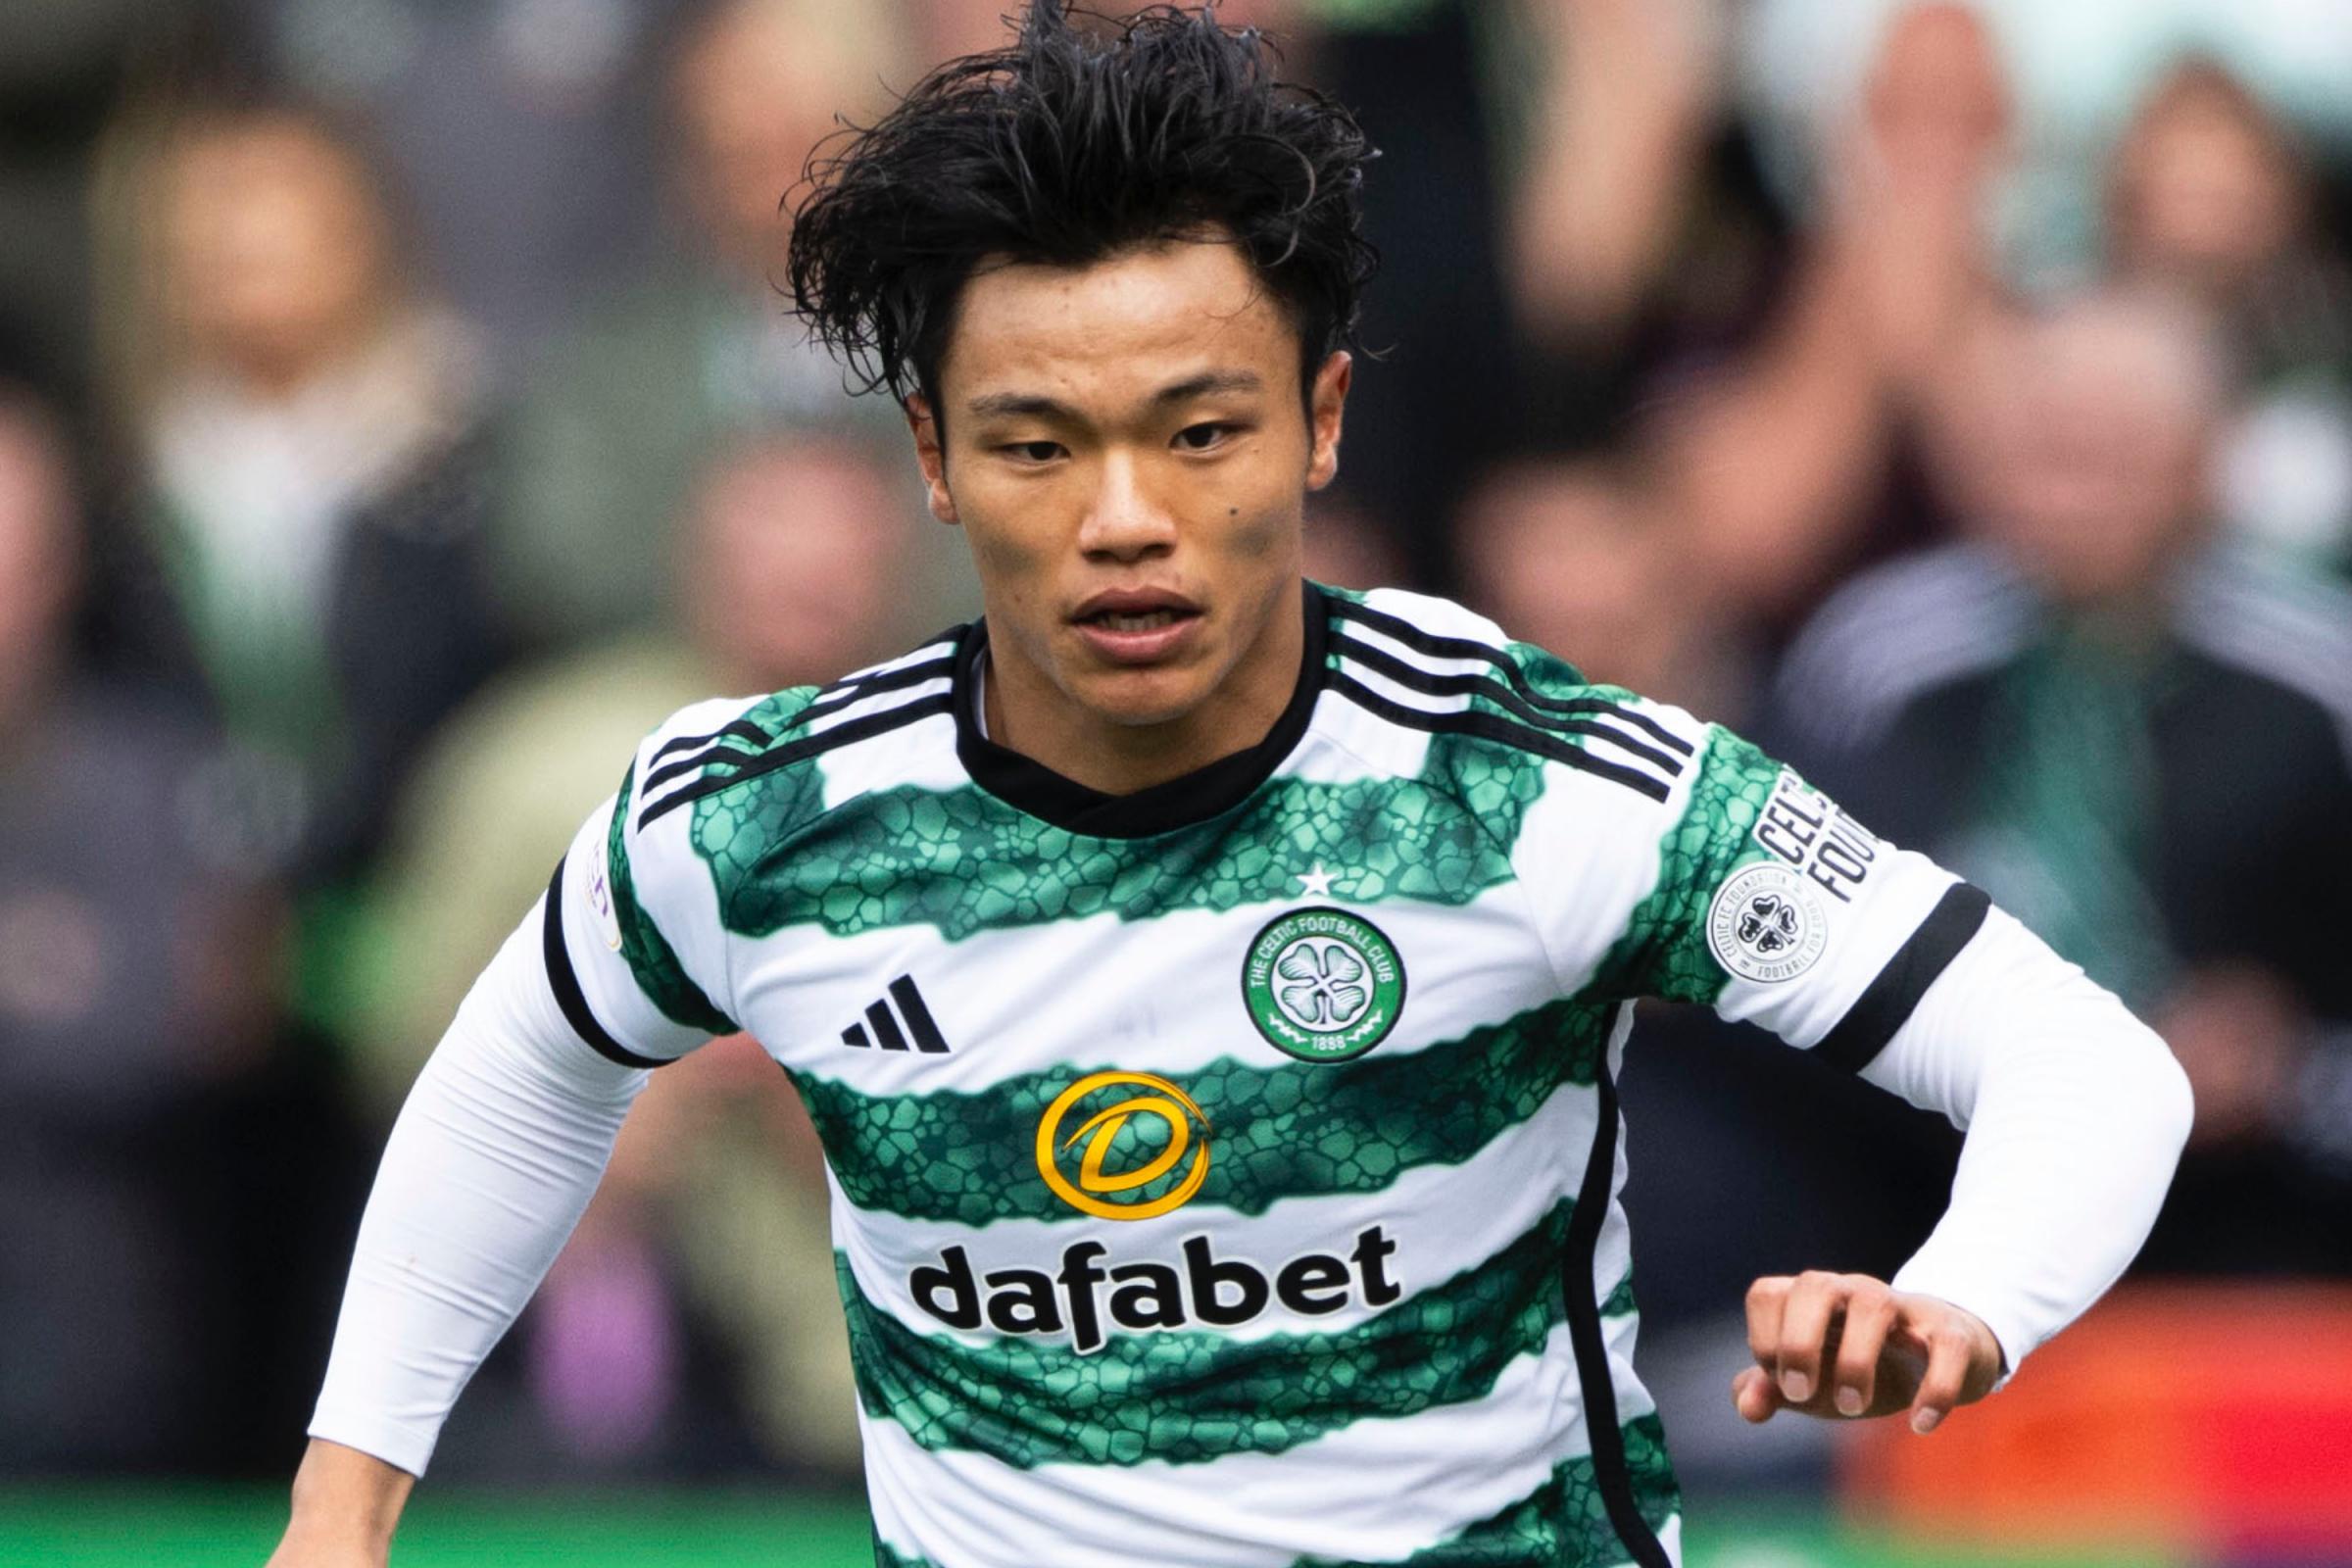 Hatate opens up on new Celtic deal as he praises Rodgers